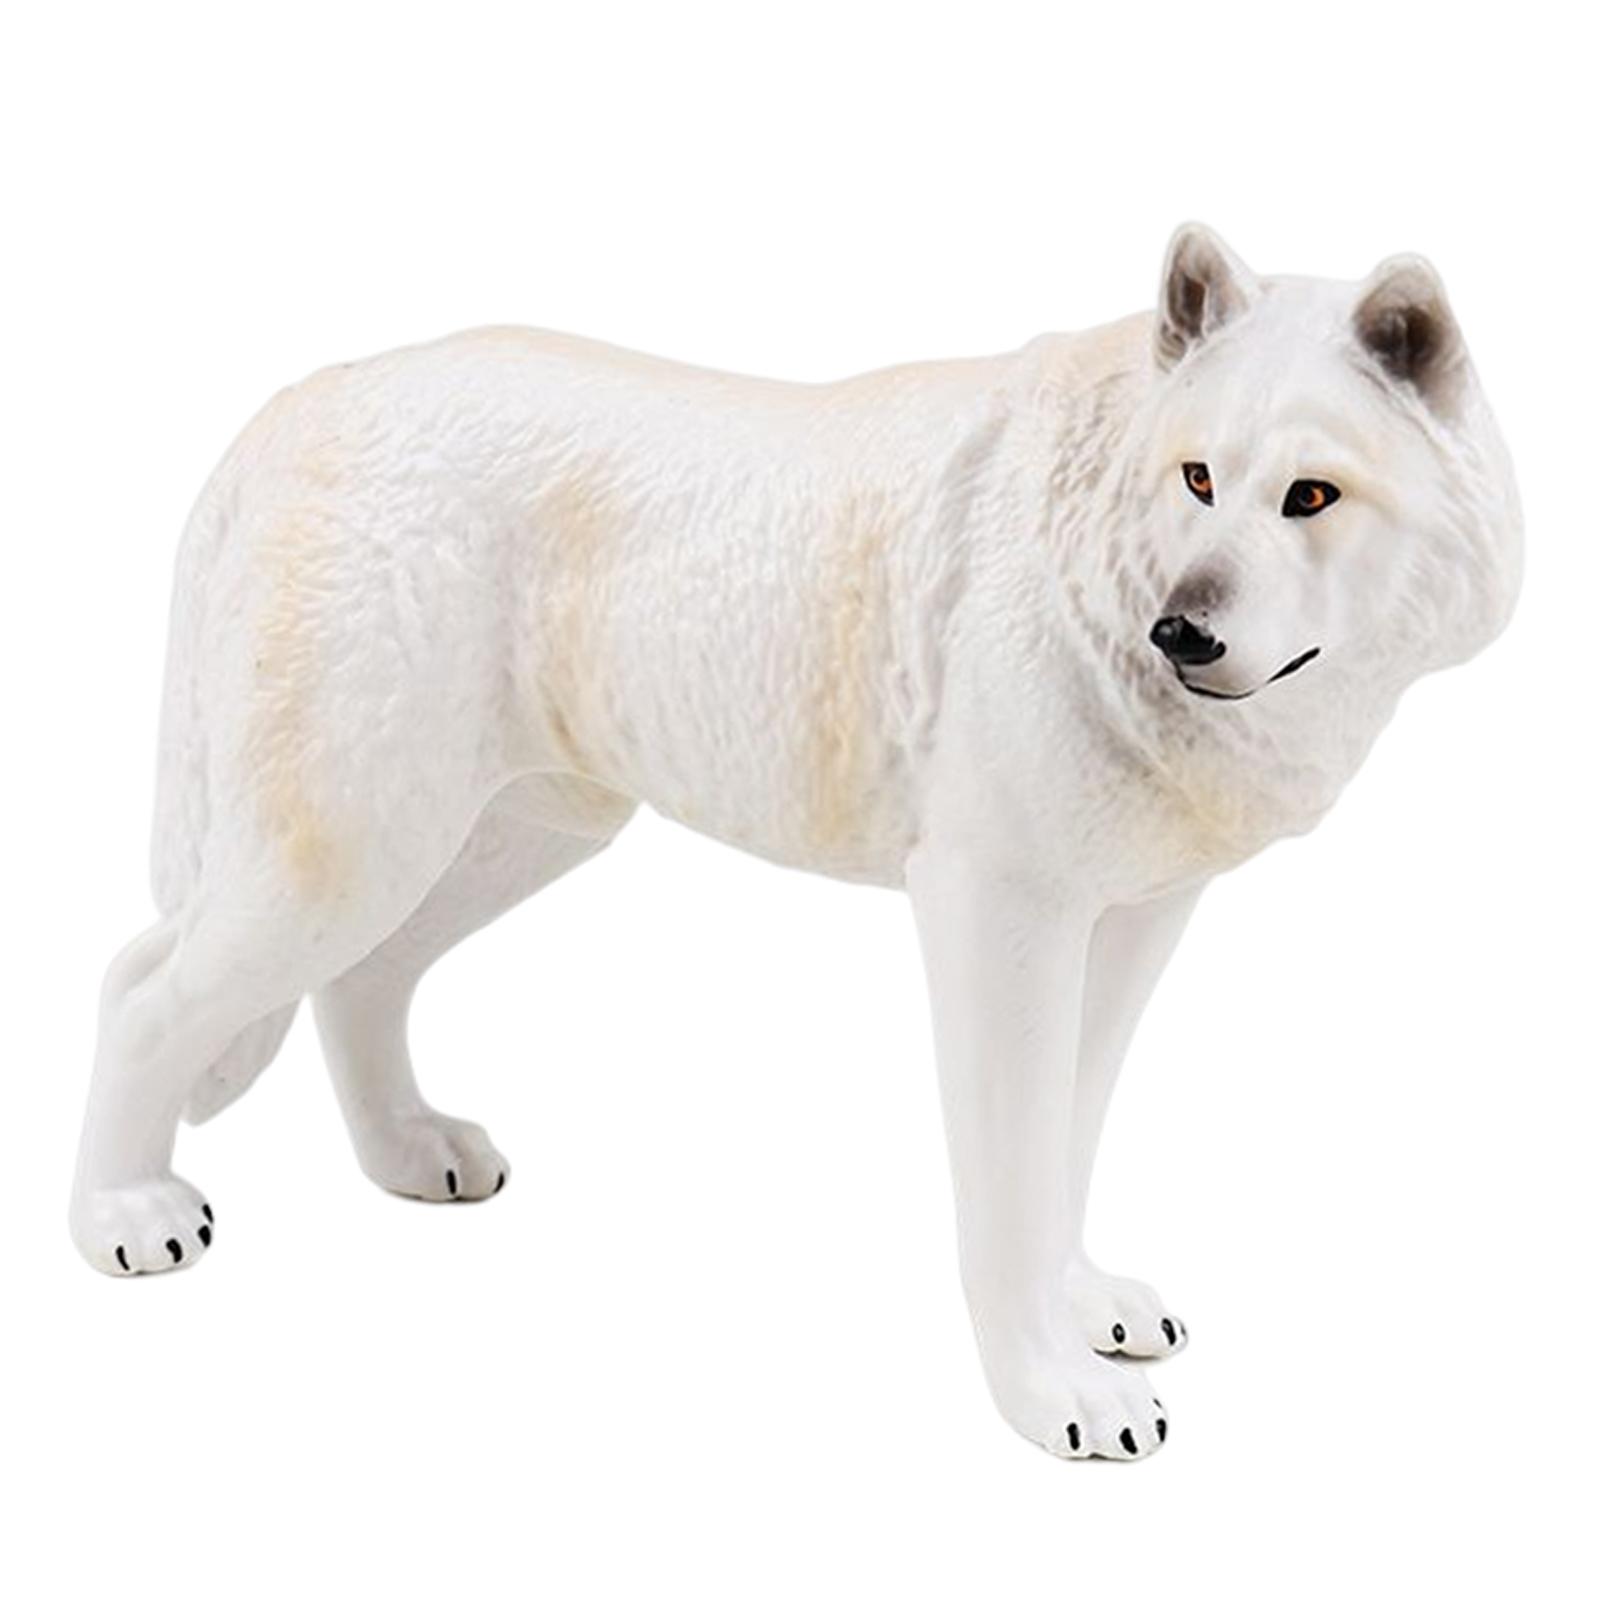 Simulation Animal Figures Miniature Toys Collections for Goodie Bag Stuffers Wolf White